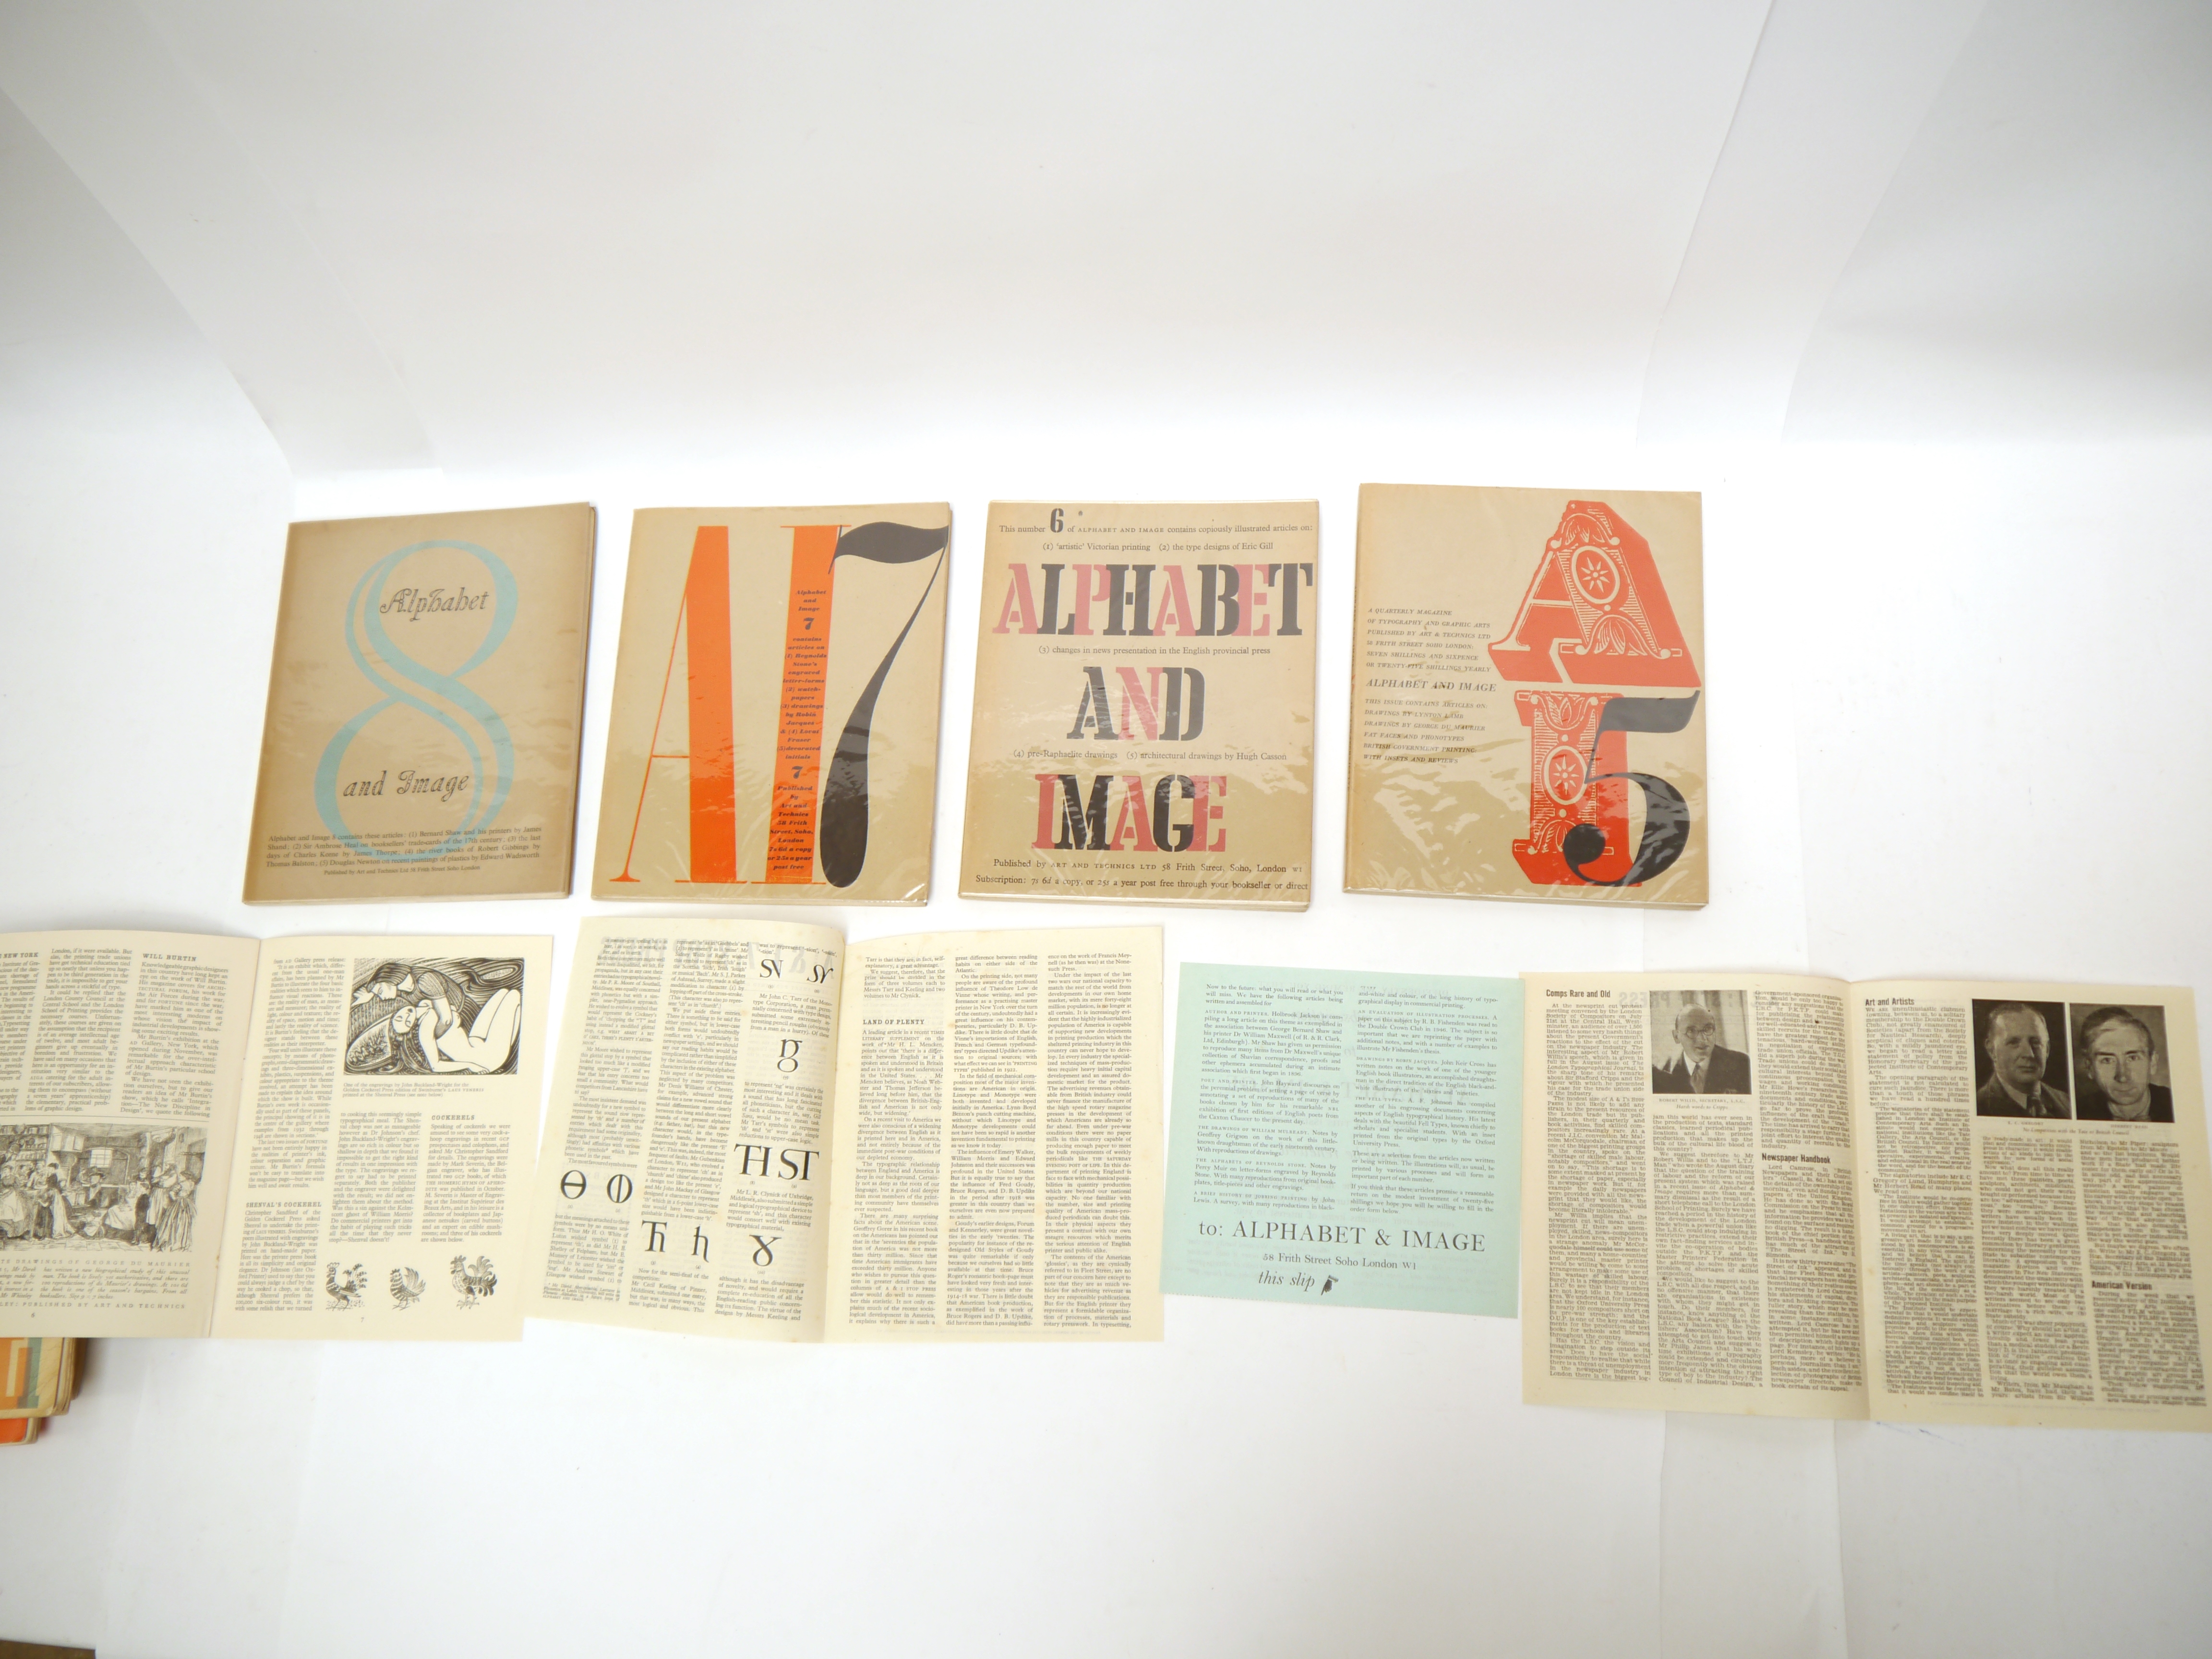 (Typography, Printing, Illustration, Early Ian Fleming in Print.), 'Alphabet & Image', Shenval - Image 3 of 31